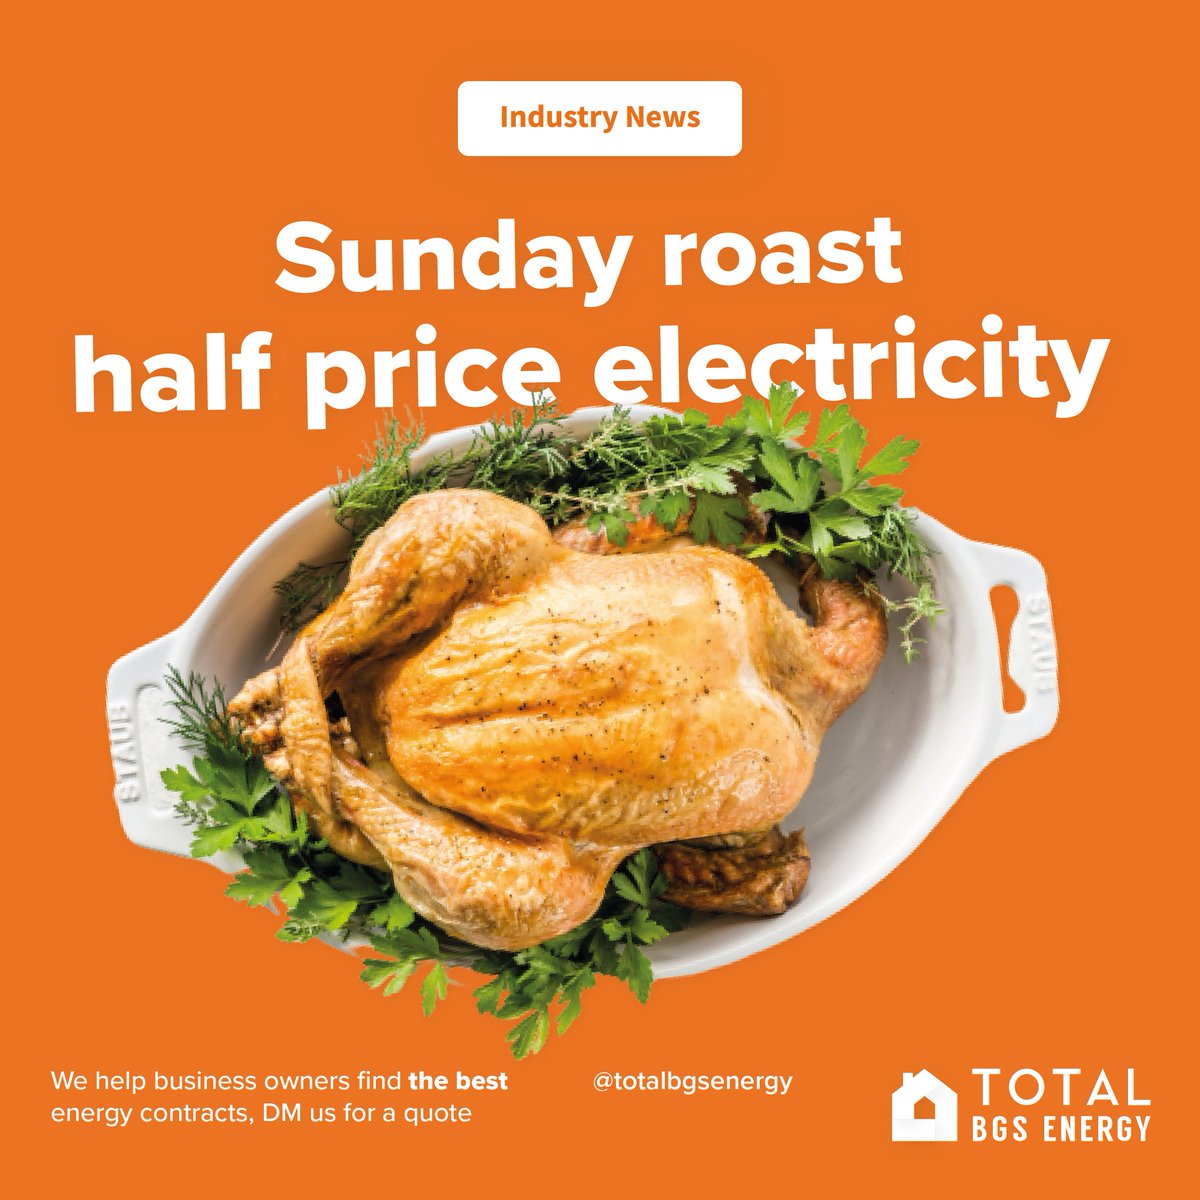 🗞️ Industry News | British Gas has an exciting offer for customers: starting now until September 24th, electricity usage between 11am and 4pm on Sundays will be charged at half the regular rate.

#EnergyBills #UkBusiness #BusinessEnergy #SmallBusiness #EnergyConsultant